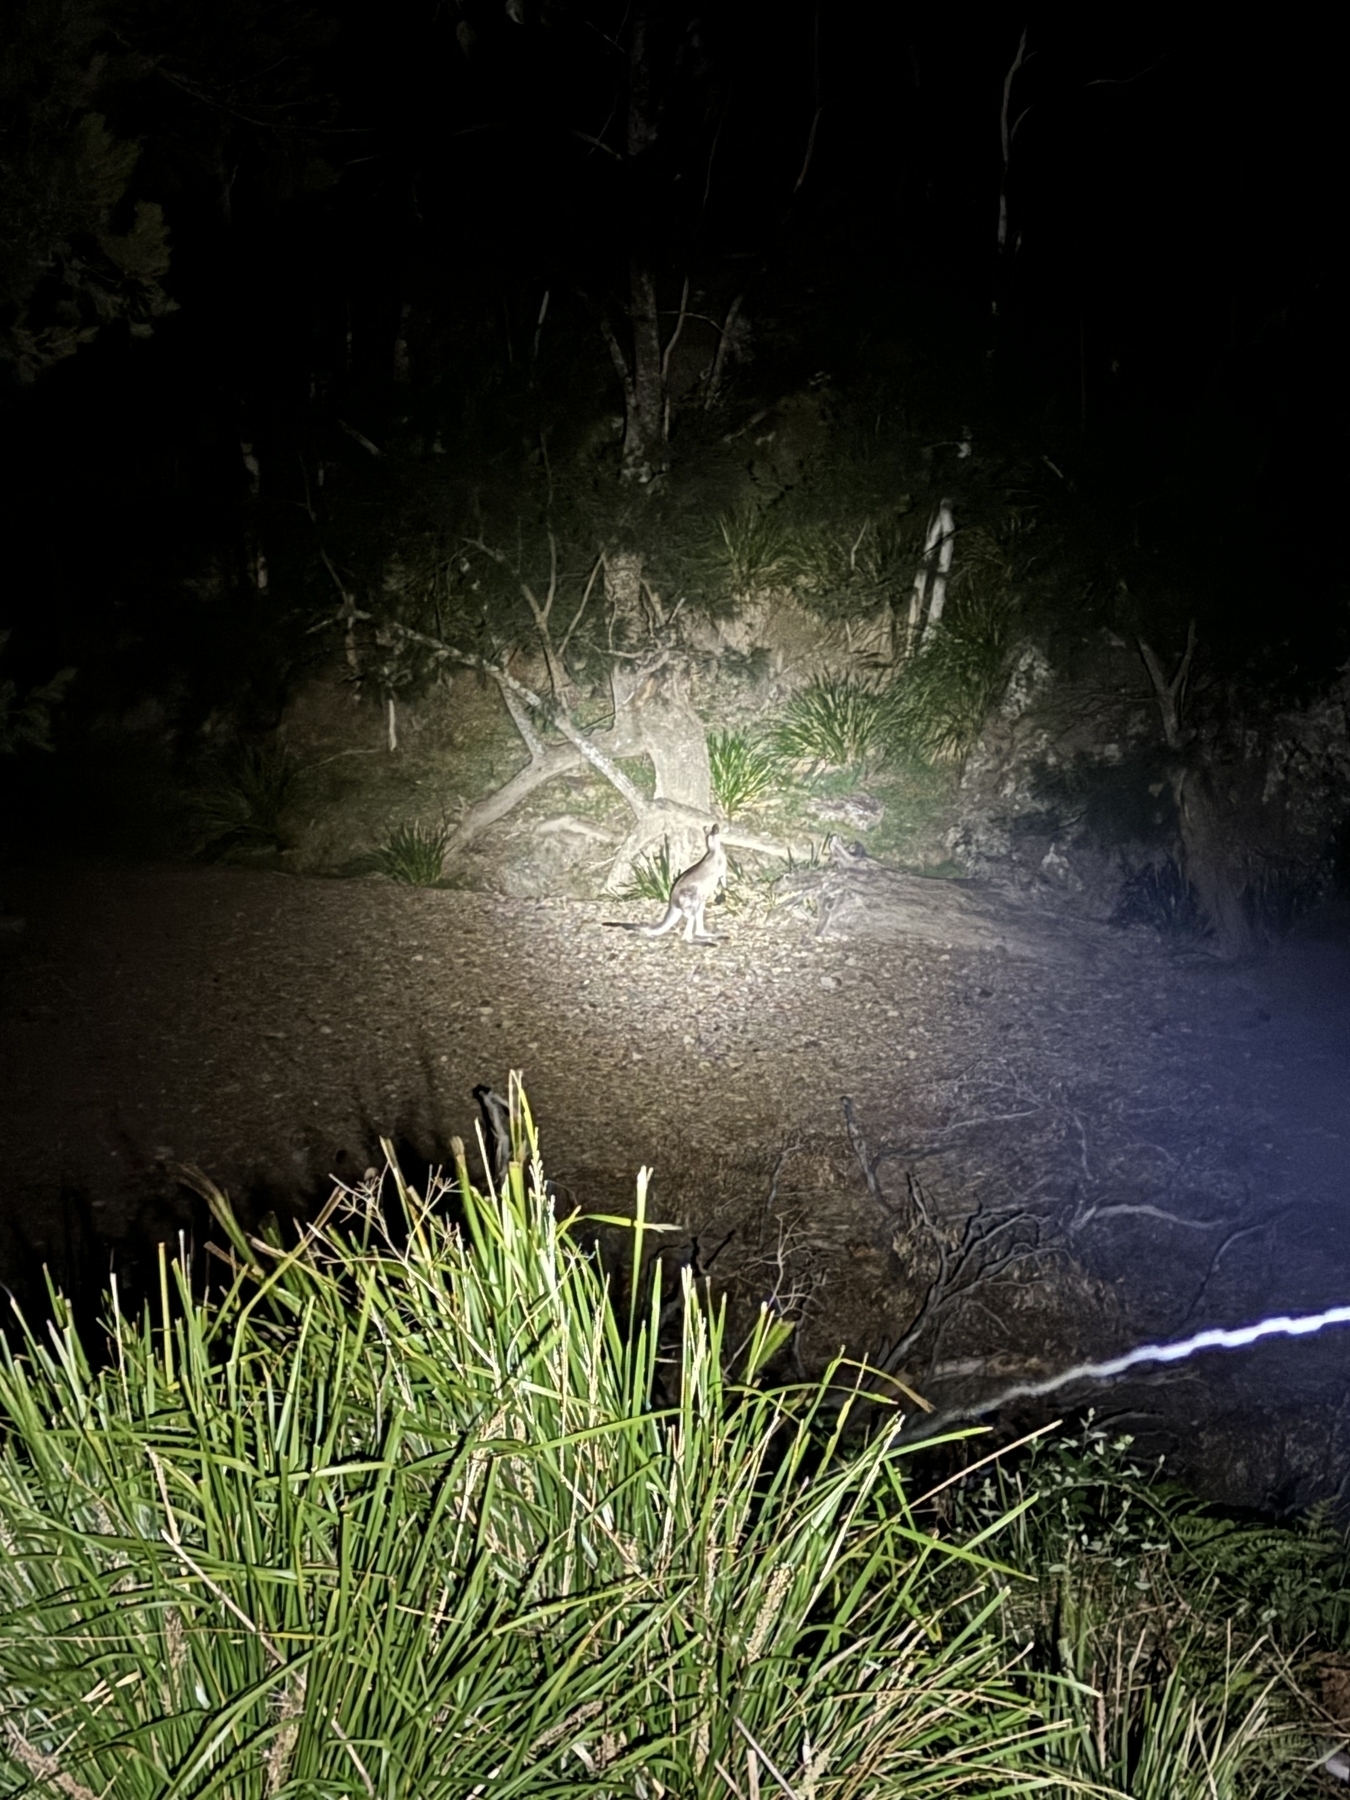 A kangaroo on a river bed at night in a spotlight